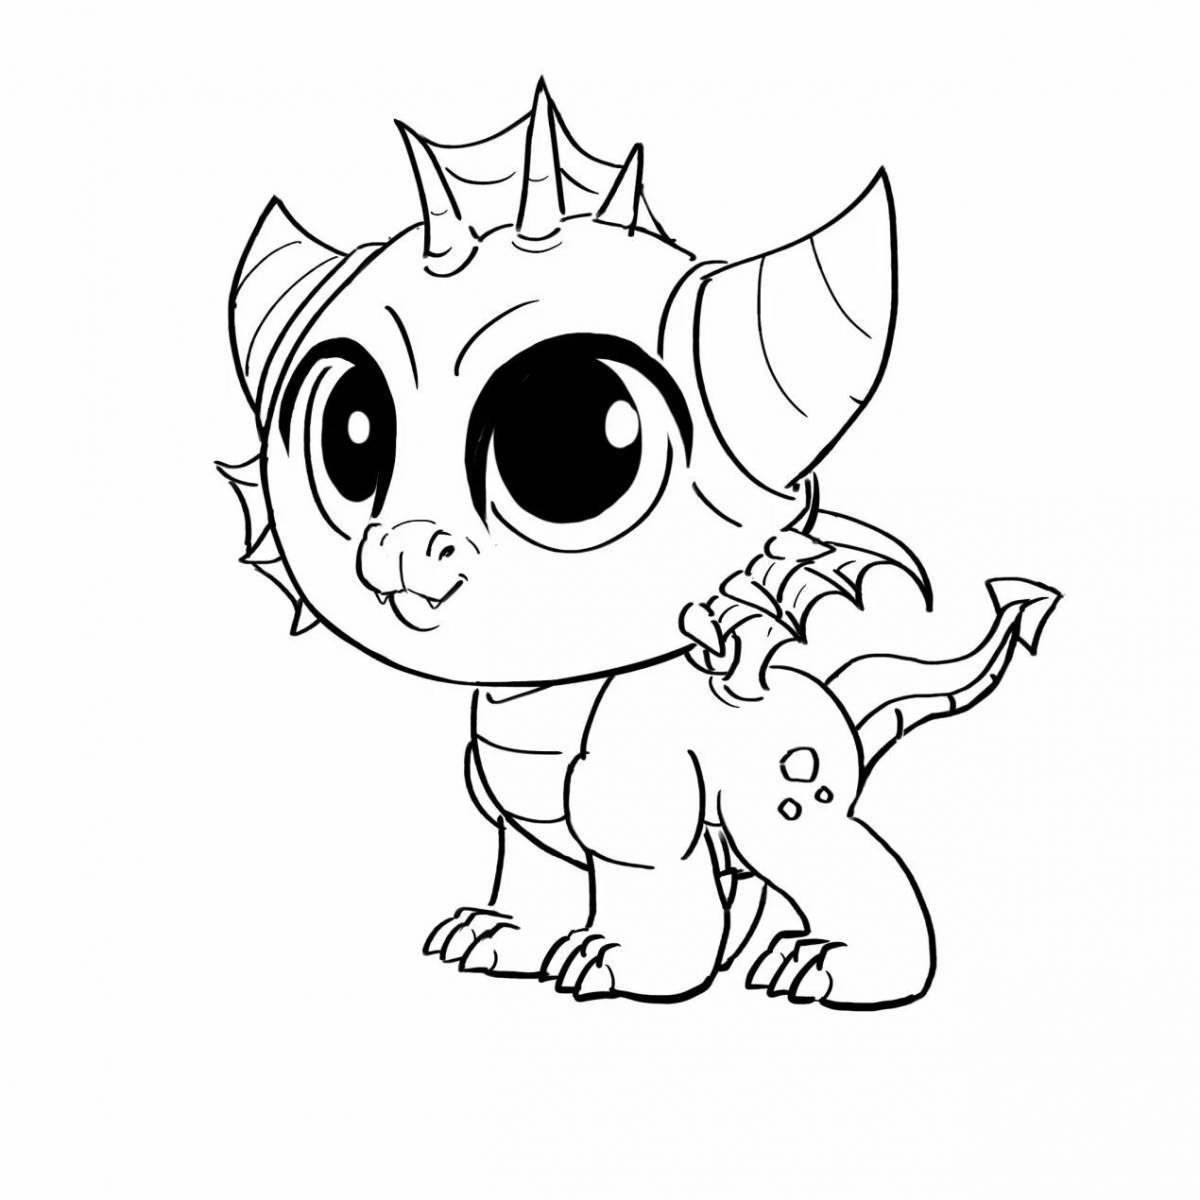 Silly cute dragon coloring book